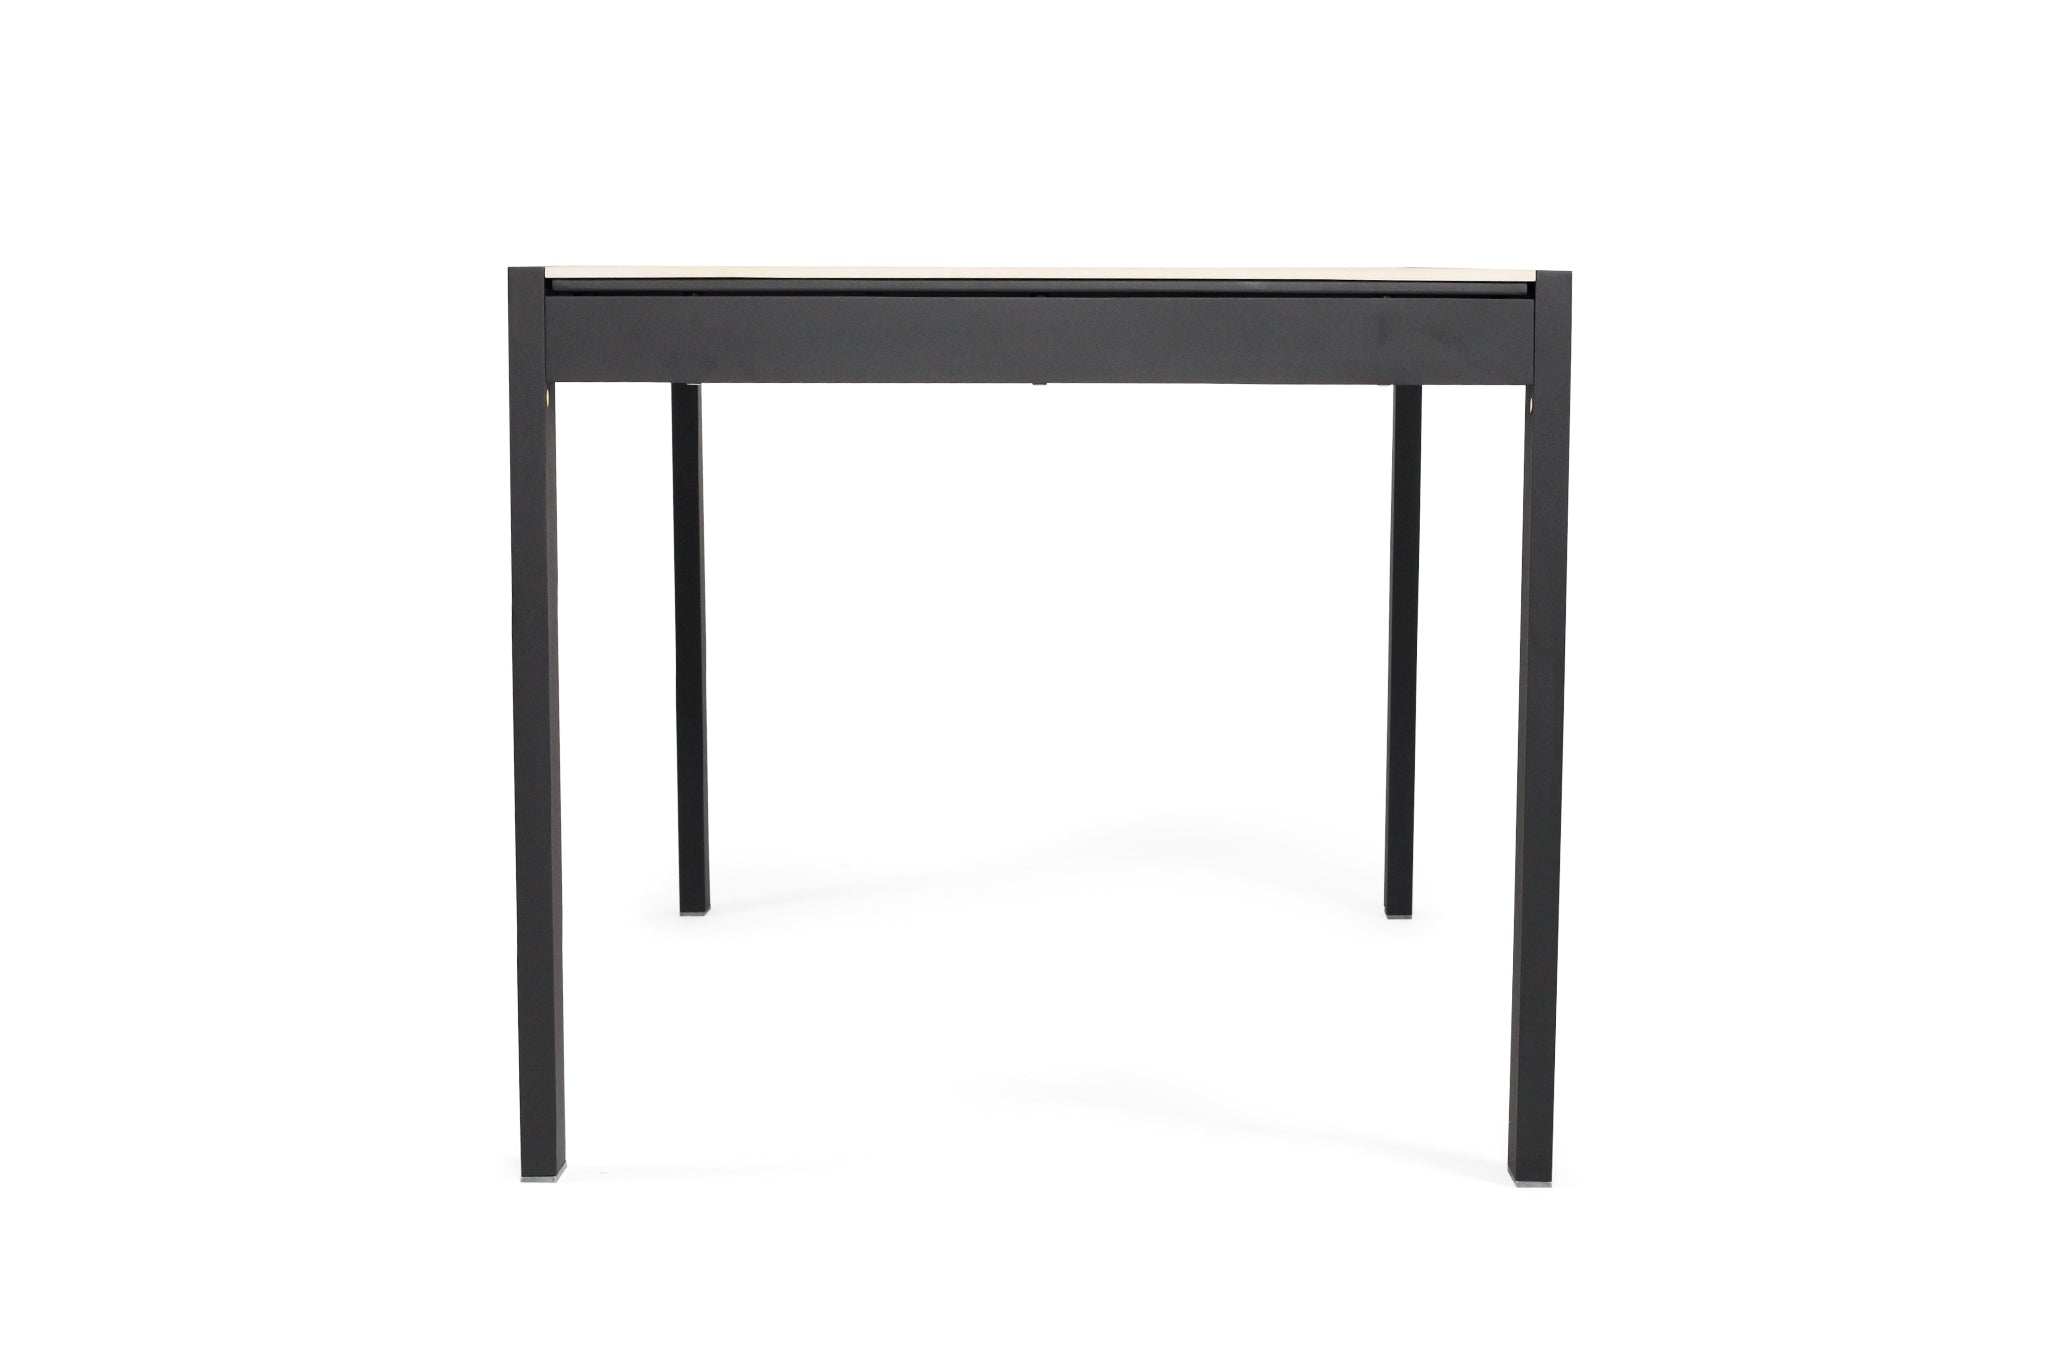 Randy Outdoor Dining Table 160cm – Black